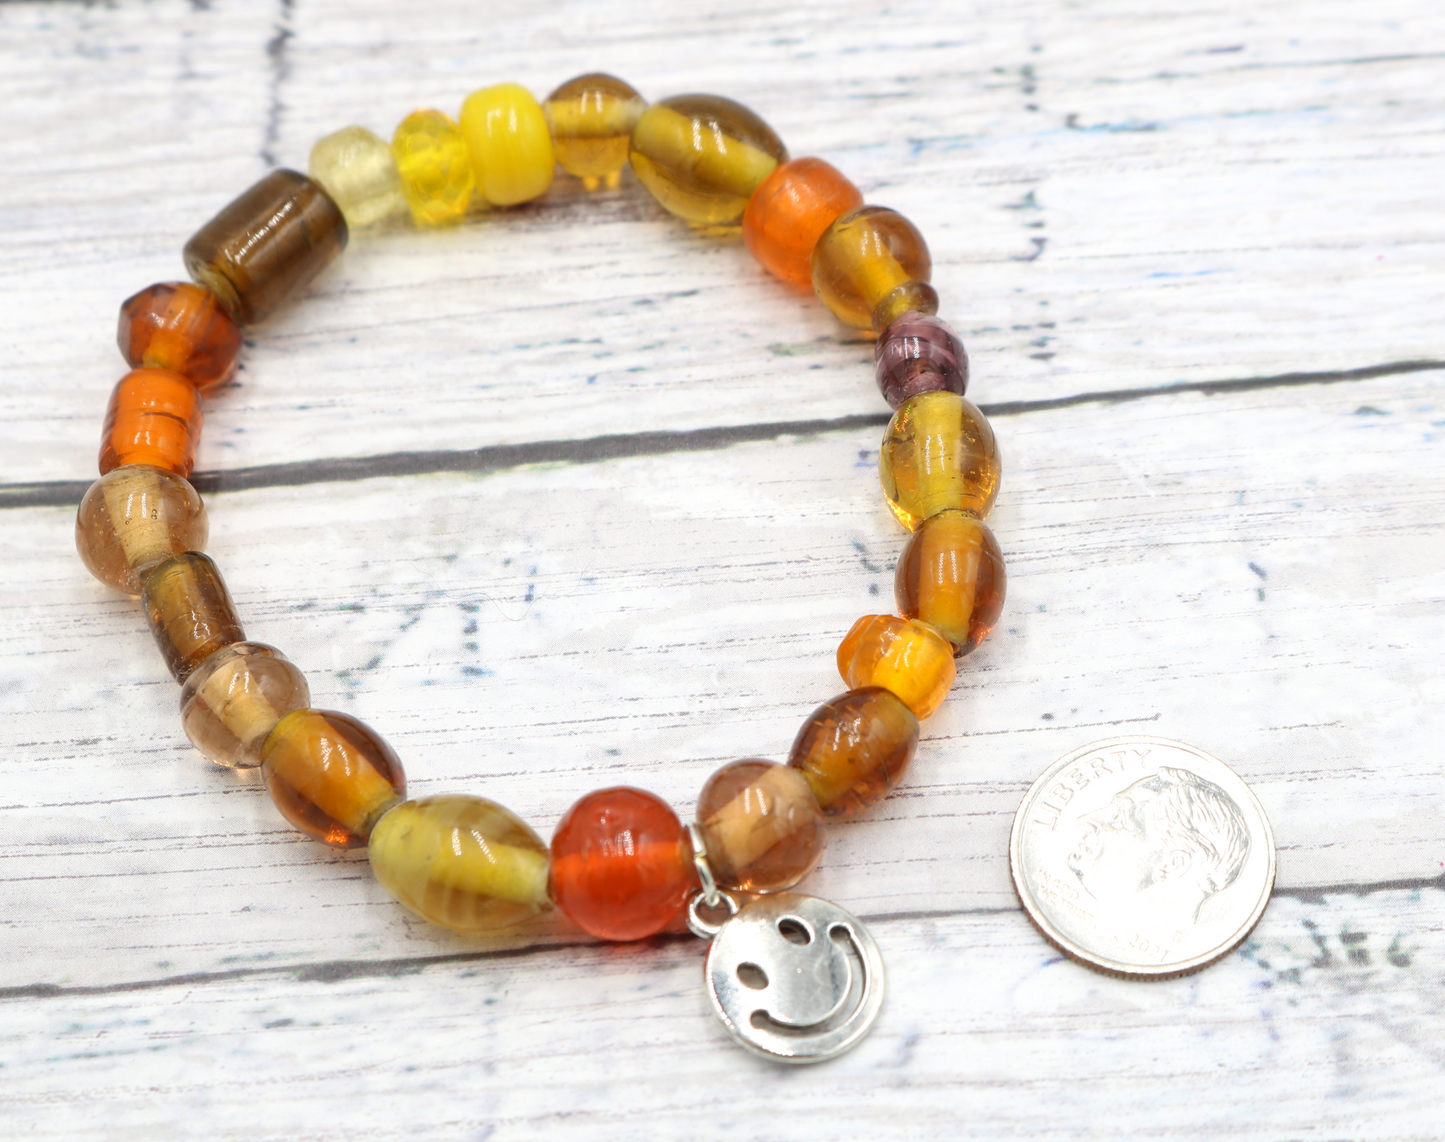 Yellow Hued Warm Artisan Glass Beads Bracelet with Silver Smile Face Charm by Monkey's Mojo